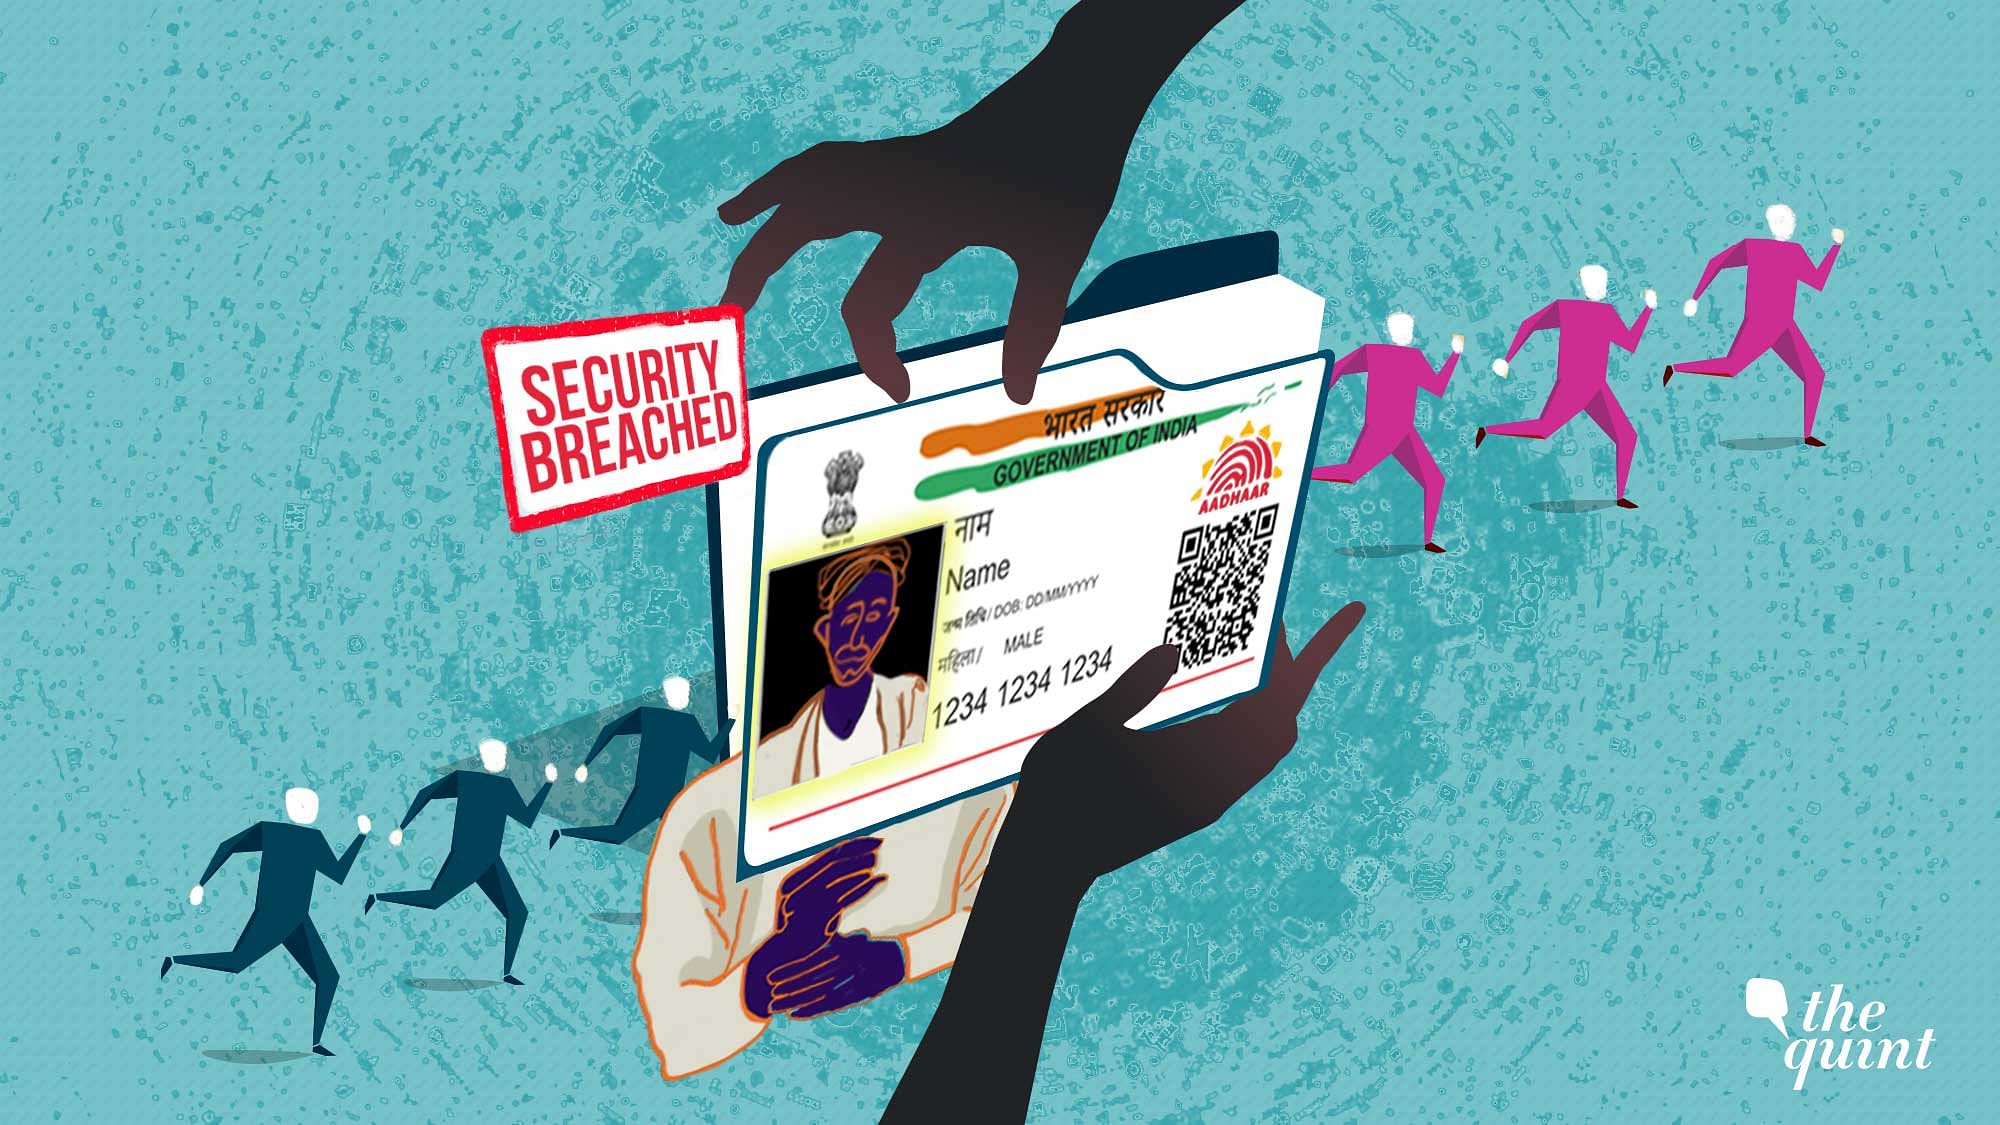 <b>The Quint</b>‘s investigation reveals glaring loopholes in the security setup of the Aadhaar portal.